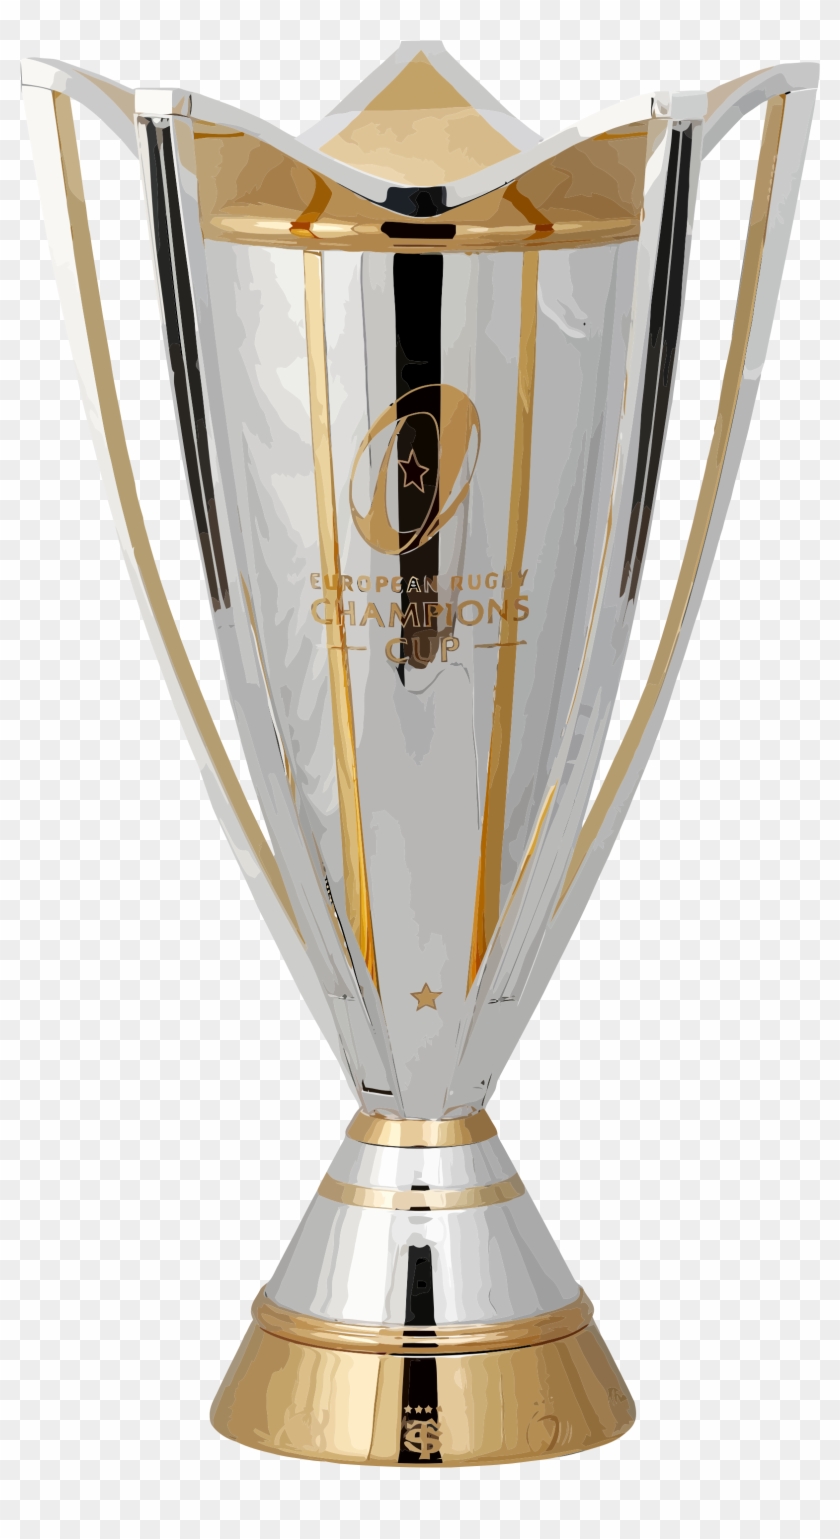 Europa League Trophy Png Rugby Champions Cup Trophy Clipart 577979 Pikpng Premier league trophy icons to download | png, ico and icns icons for mac. rugby champions cup trophy clipart